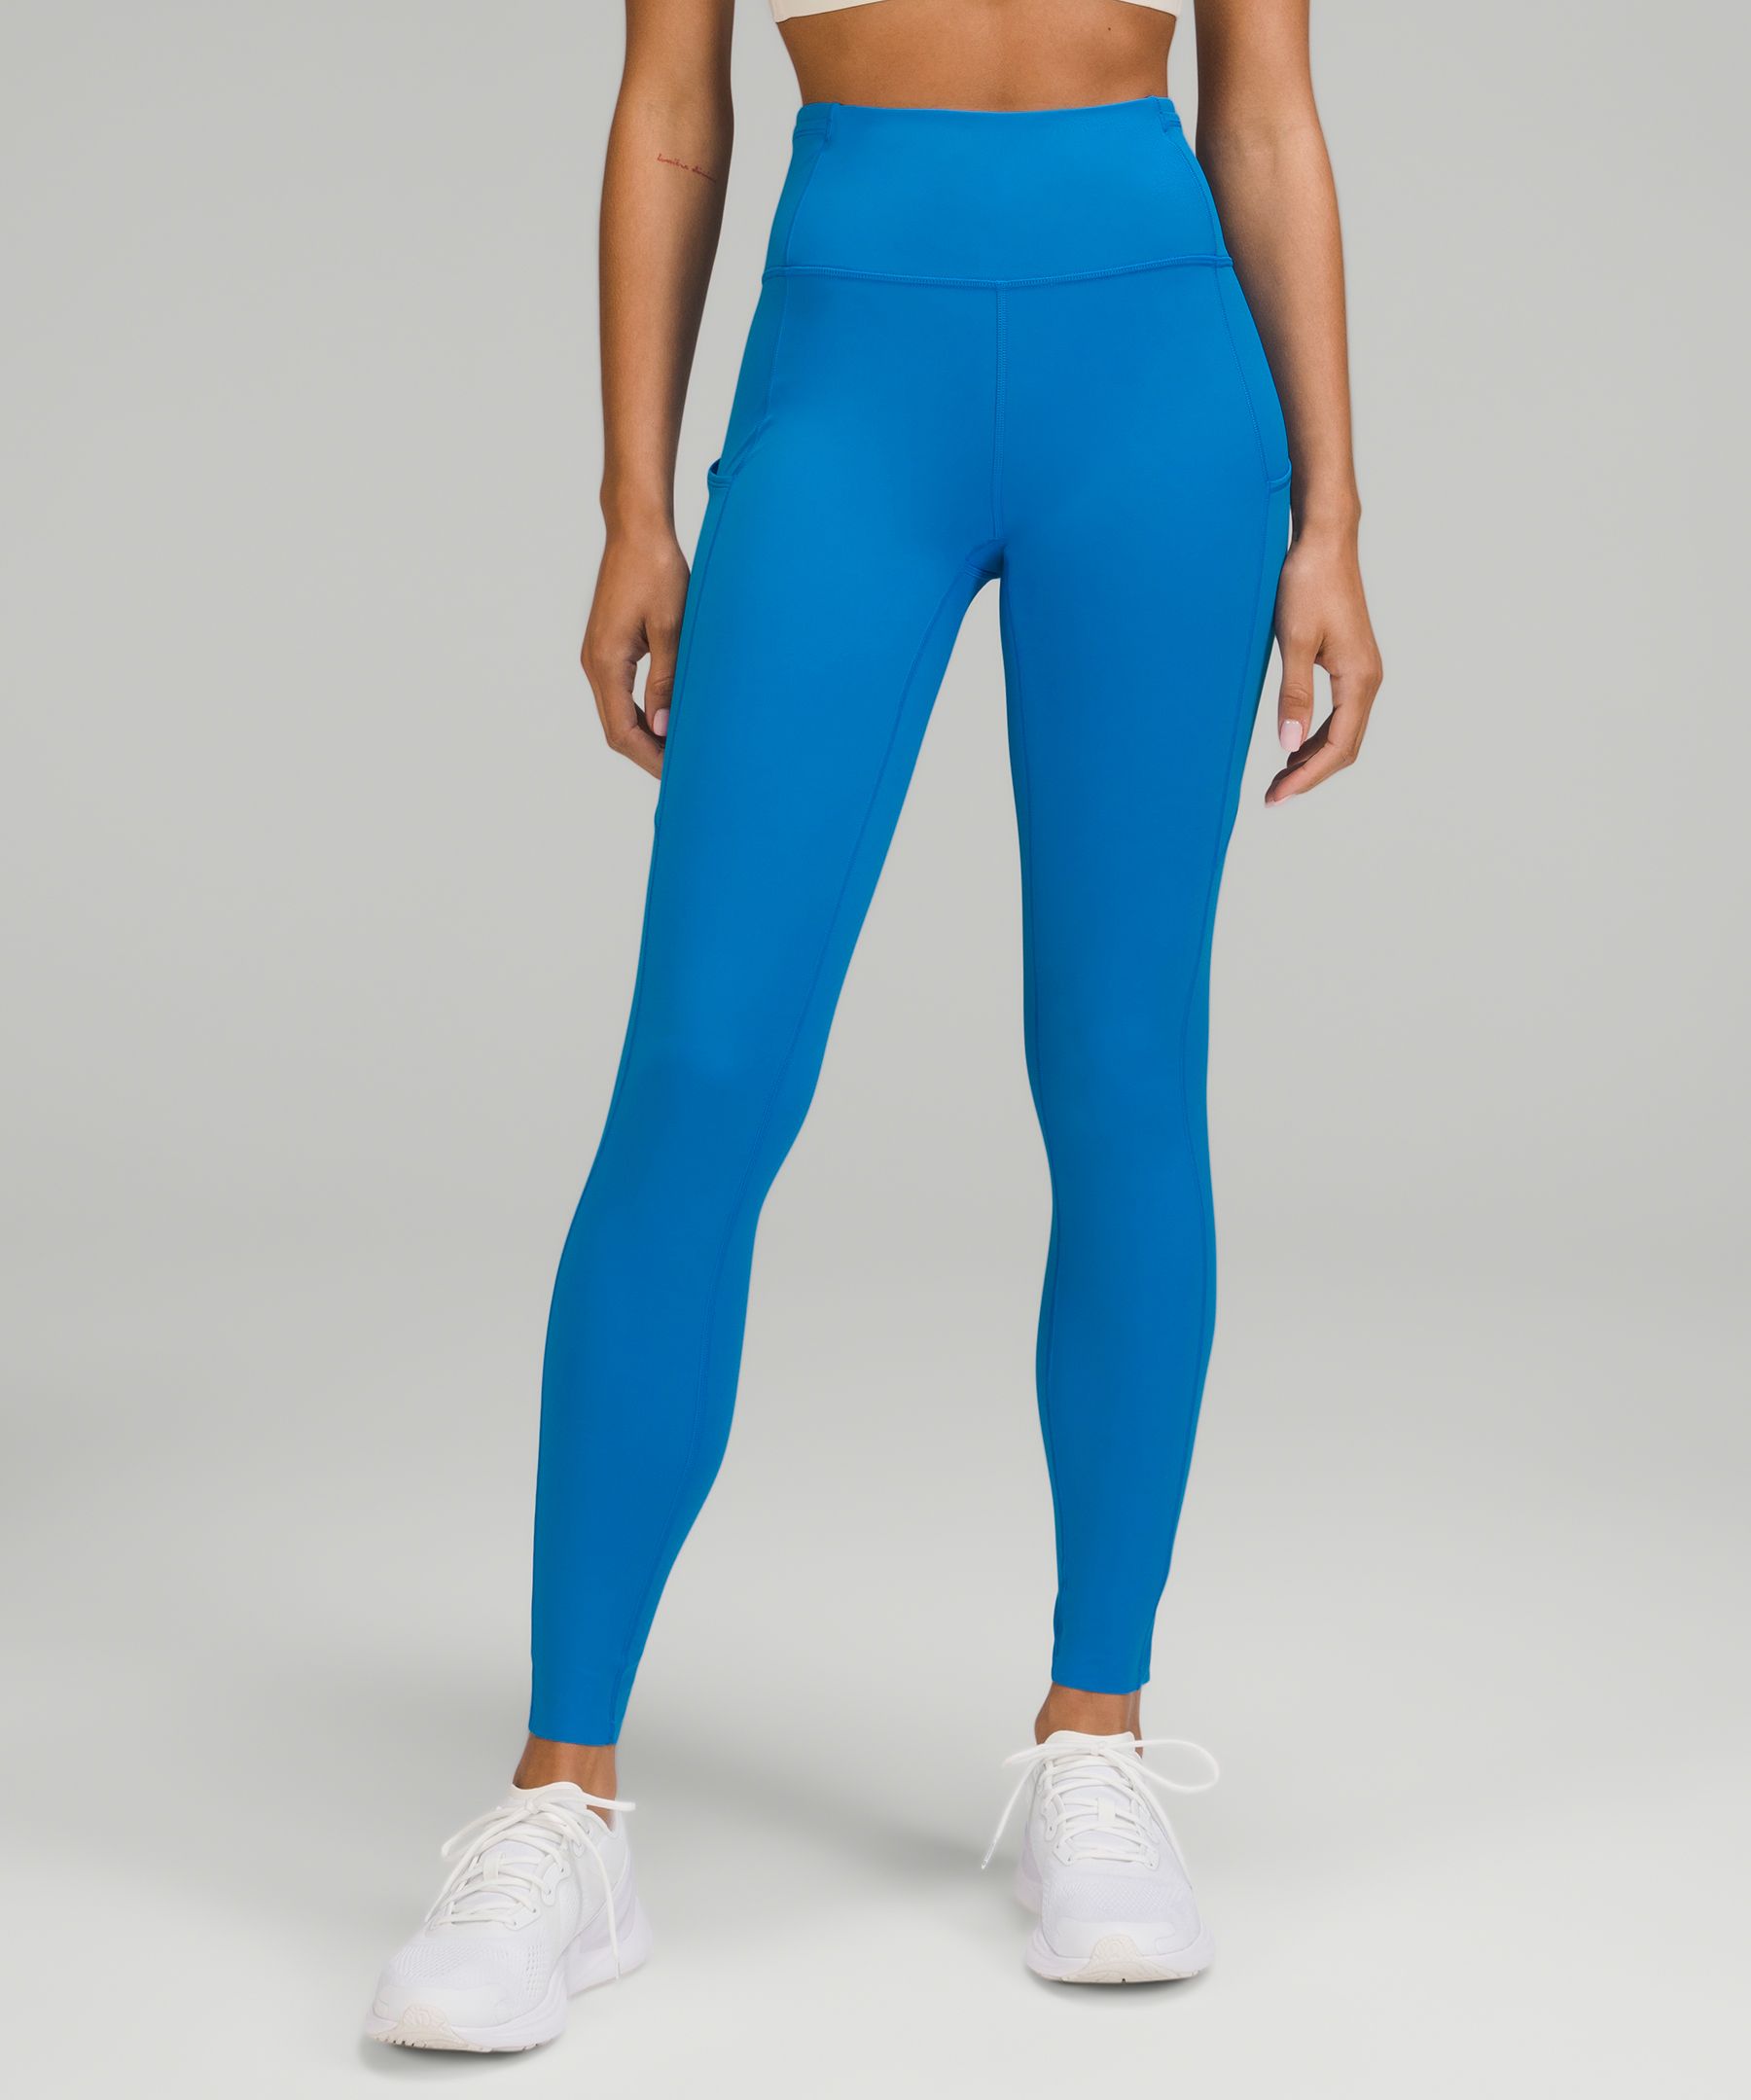 Lululemon Fast and Free Tight 28 *Non-Reflective - Larkspur